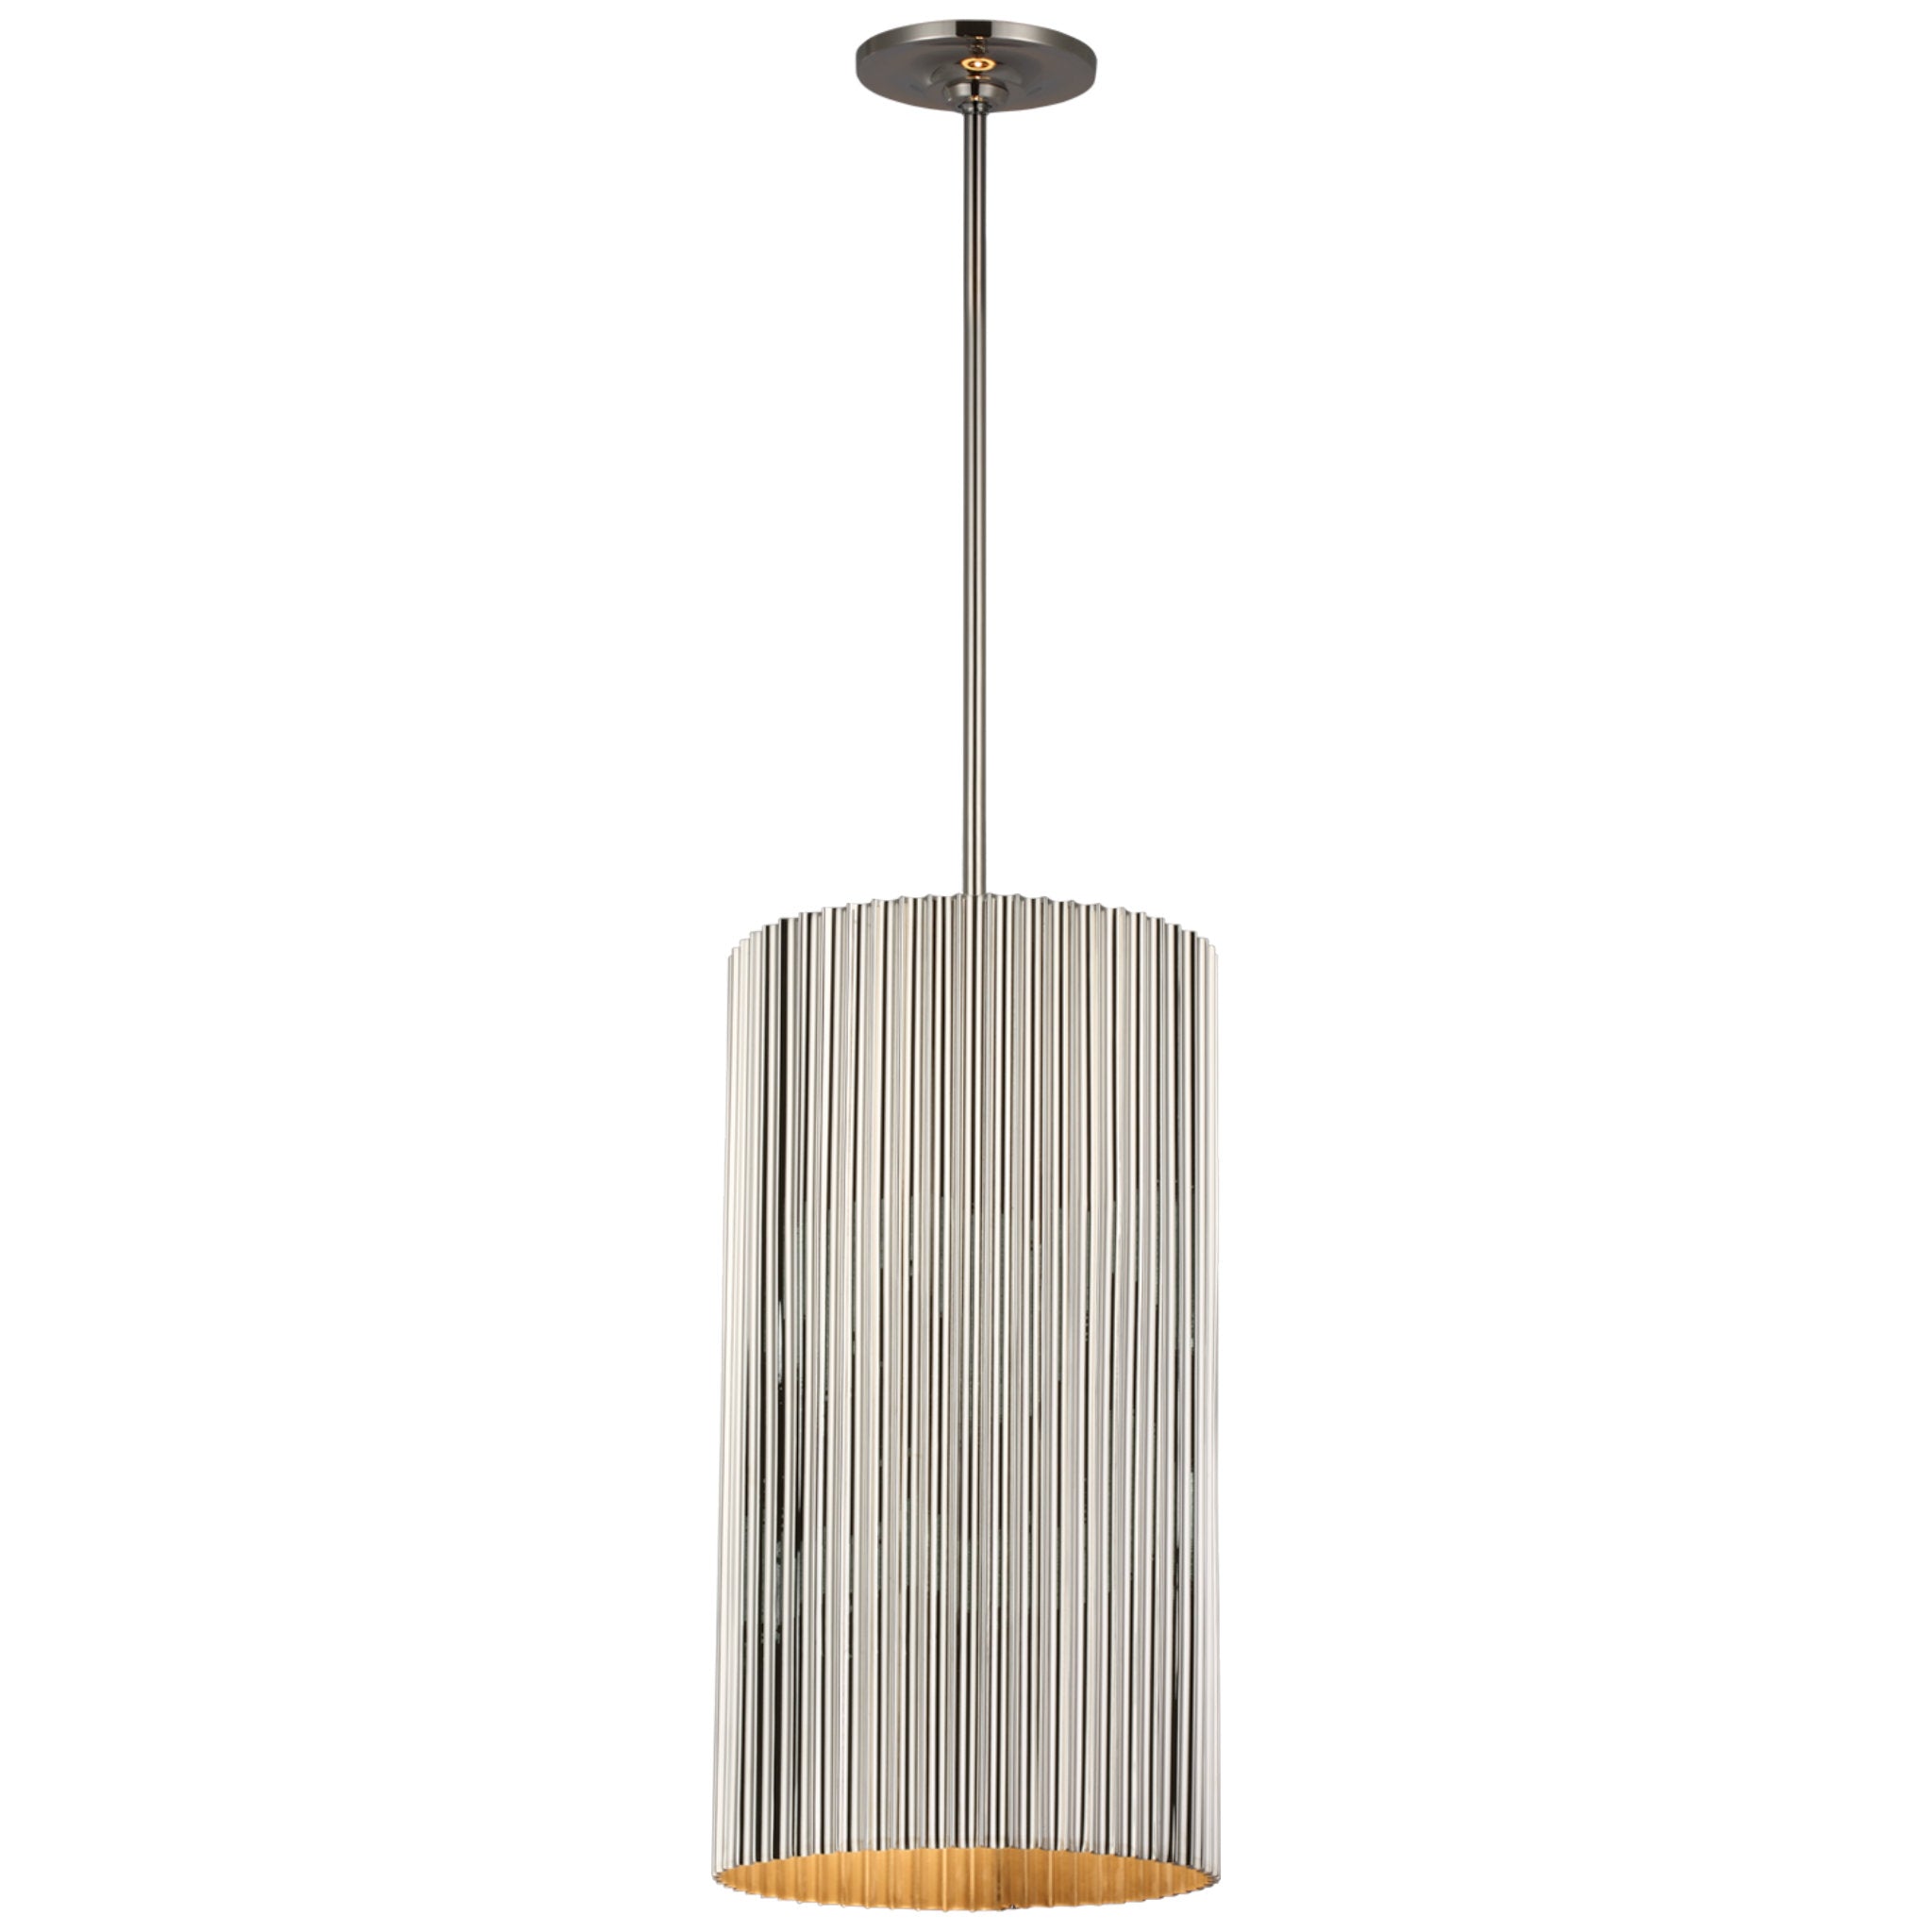 Marie Flanigan Rivers Medium Fluted Pendant in Polished Nickel